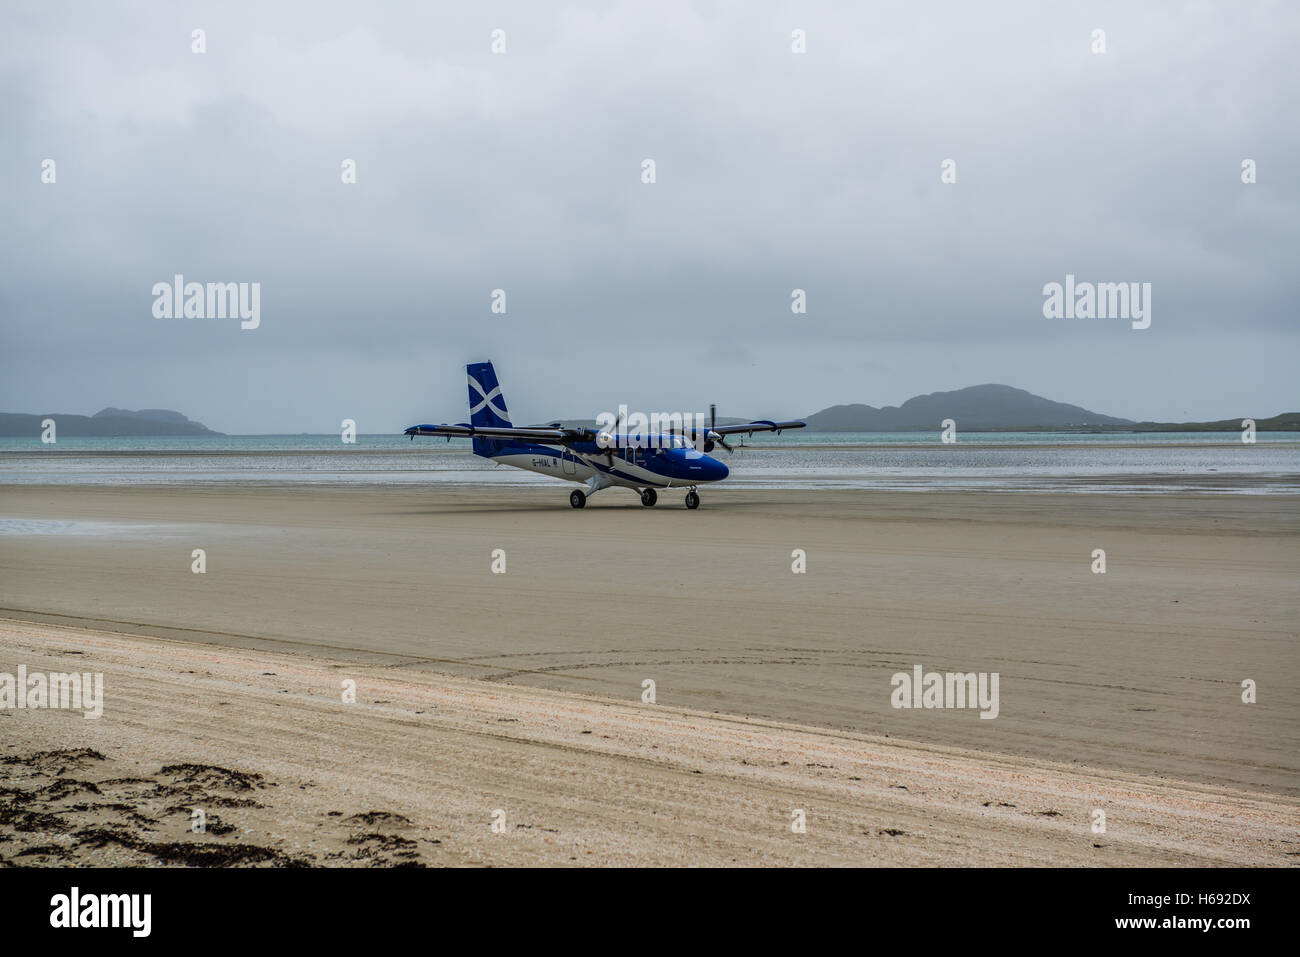 A Loganair flight from Glasgow lands on  An Tràigh Mhòr beach (English: The Big Beach) which is used as a runway. Planes can only land and take off at low tide meaning that the timetable varies. Voted the world's most stunning landing spot, Barra's airport is the only airport in the world to have scheduled flights landing on a beach. The aircraft currently in operation on Barra is the de Havilland Canada DHC-6 Twin Otter, flown by Loganair on services to Glasgow. Stock Photo